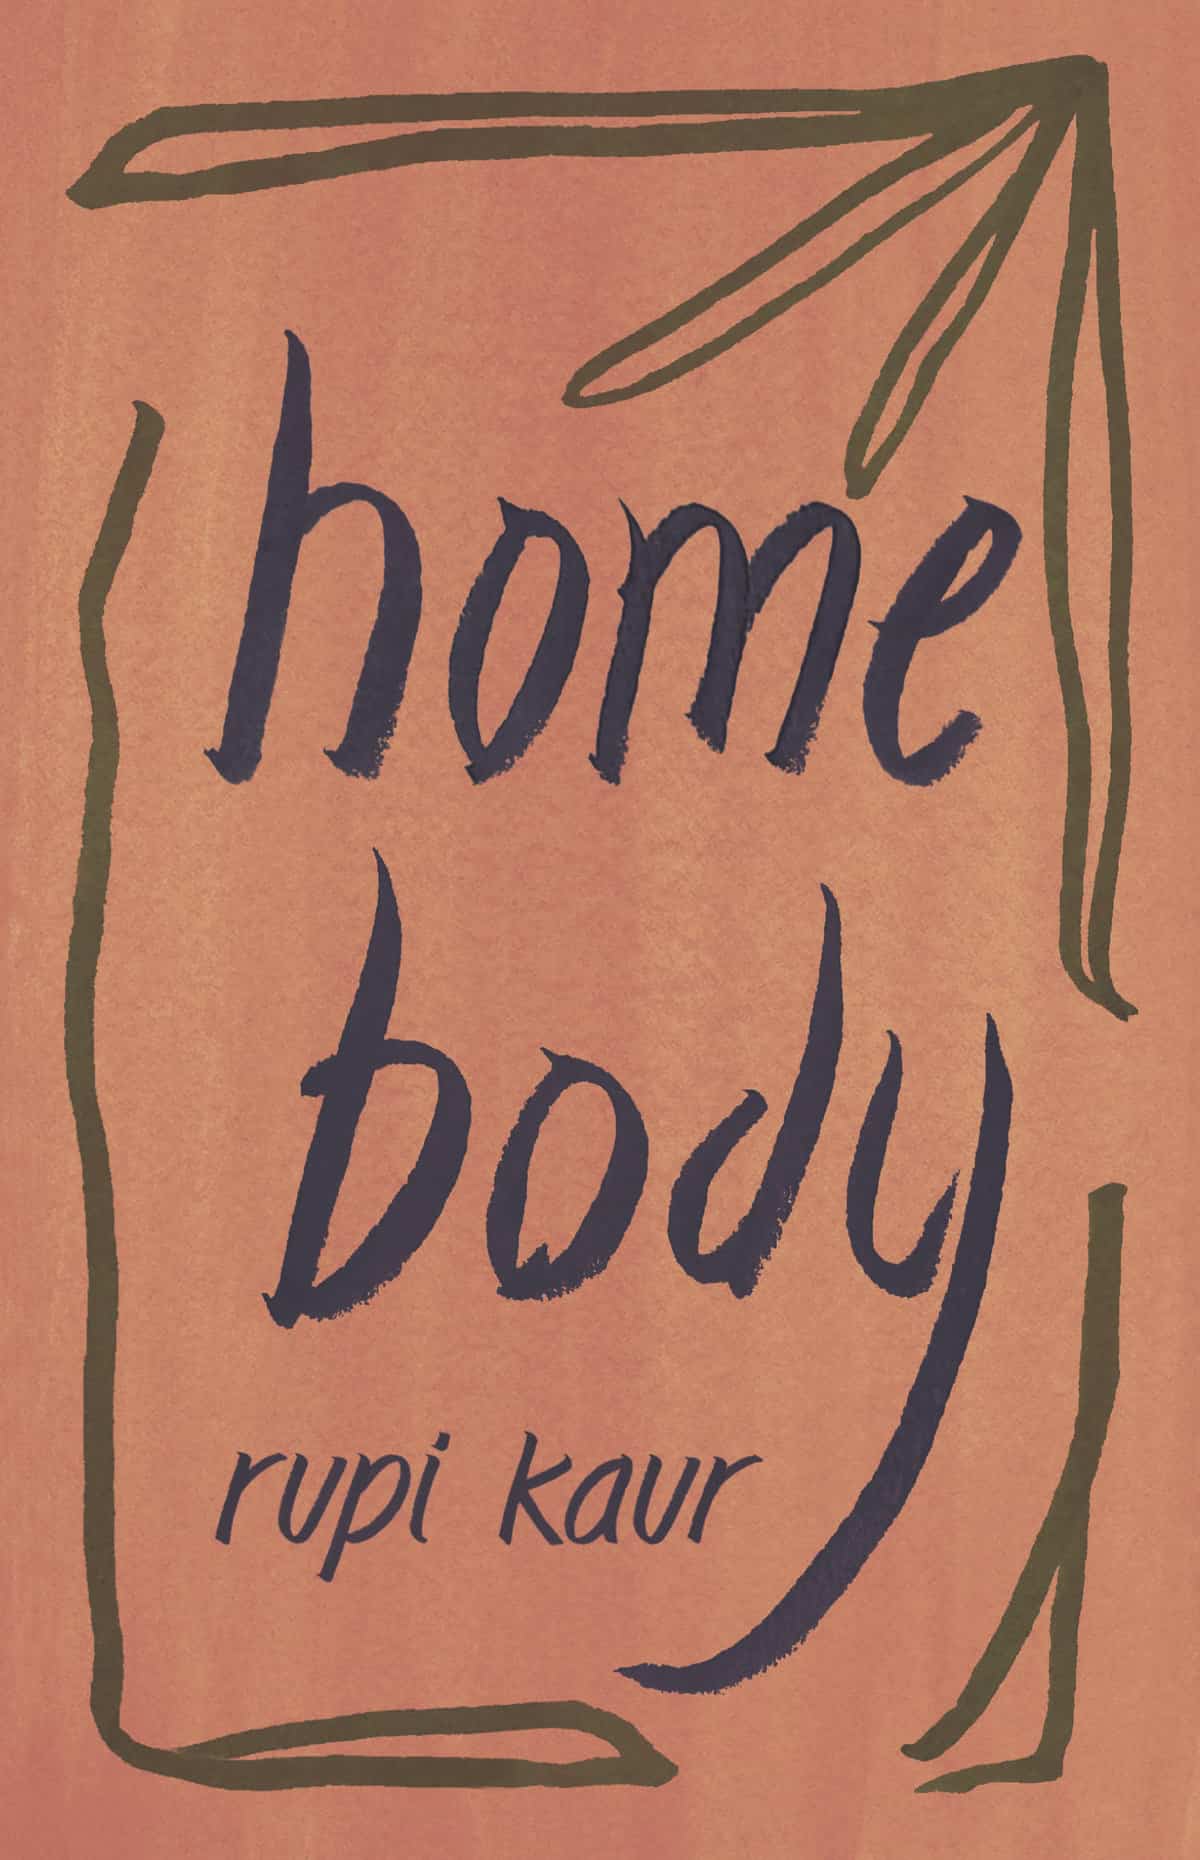 A poetry book cover for Home Body by Rupi Kaur.